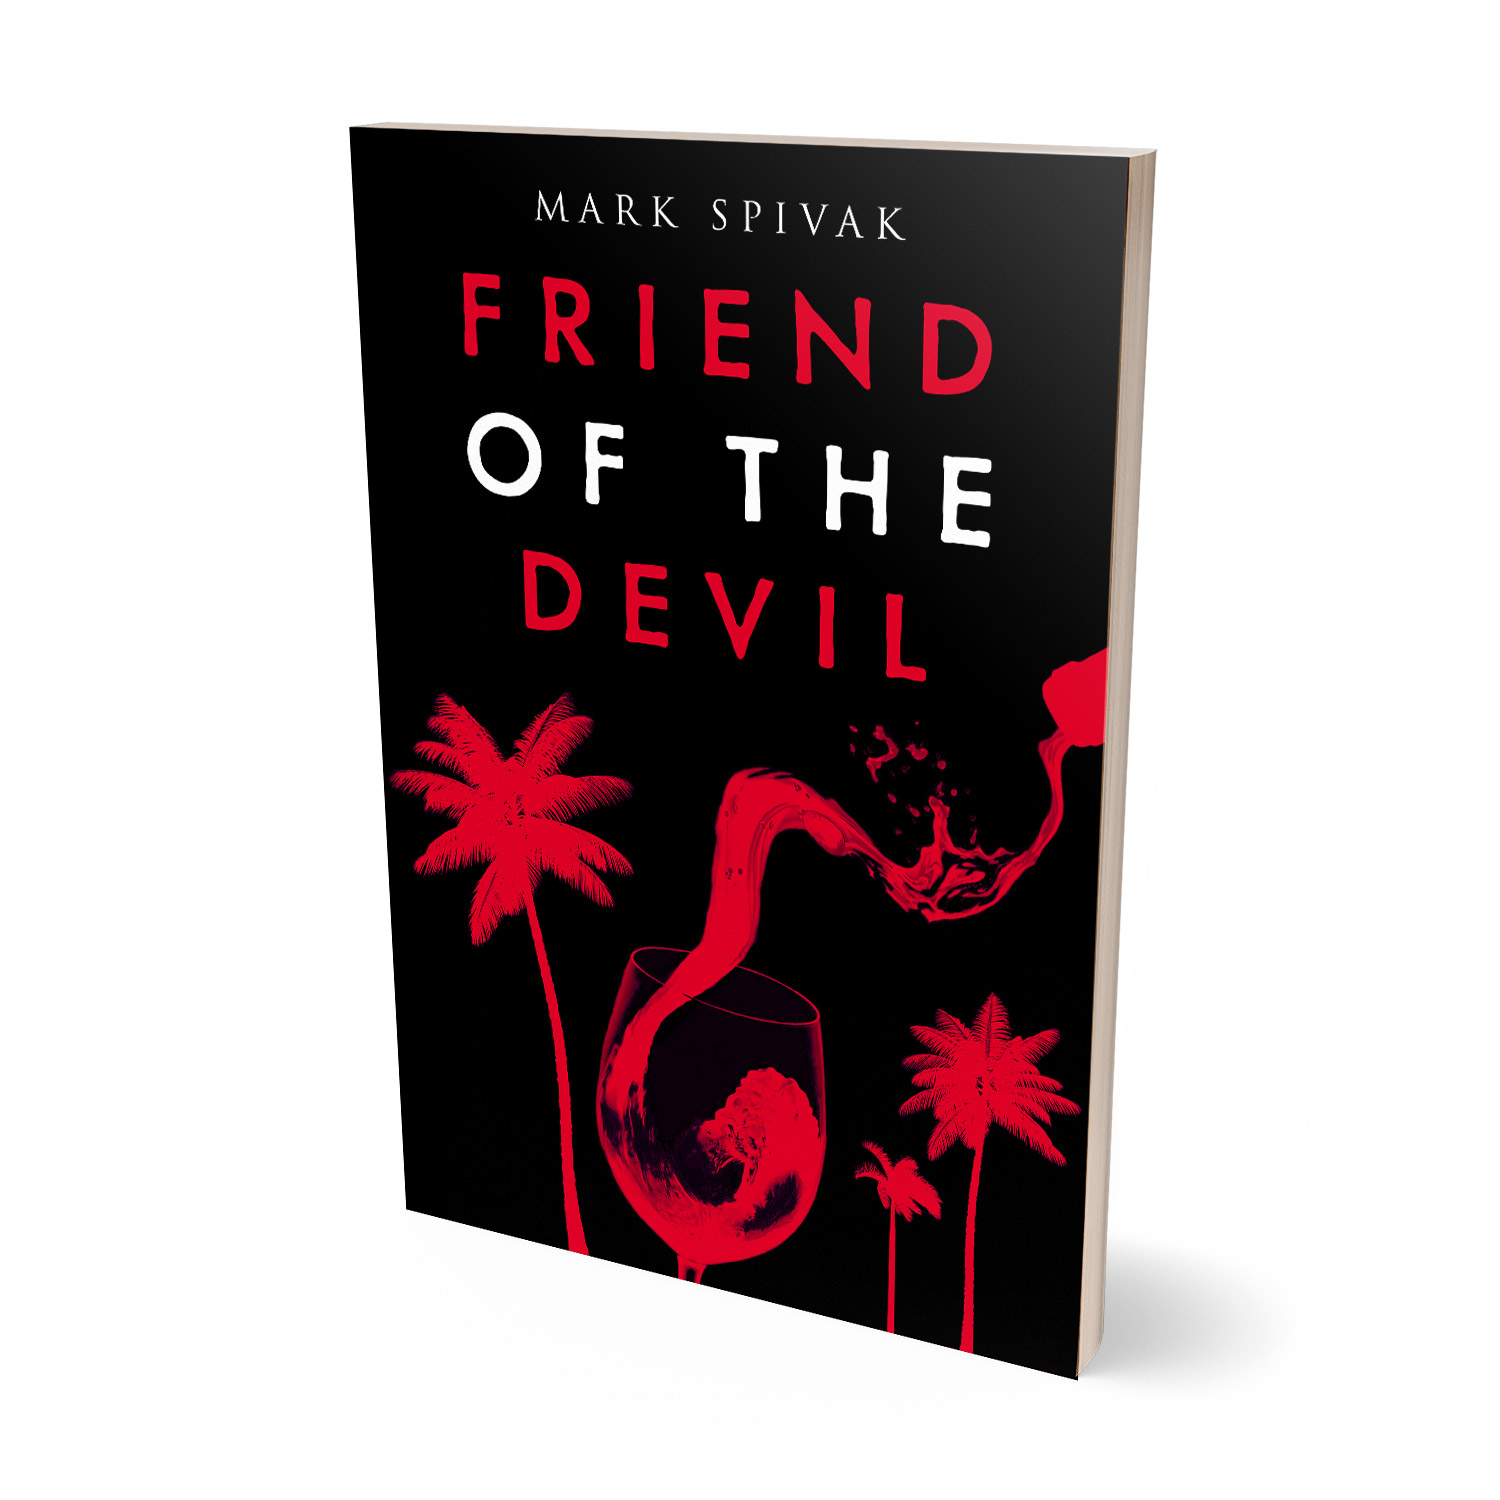 'Friend of the Devil' is a delicious tale of greed. The author is Mark Spivak. The cover design of the book is by Mark Thomas. To learn more about what Mark could do for your book, please visit coverness.com